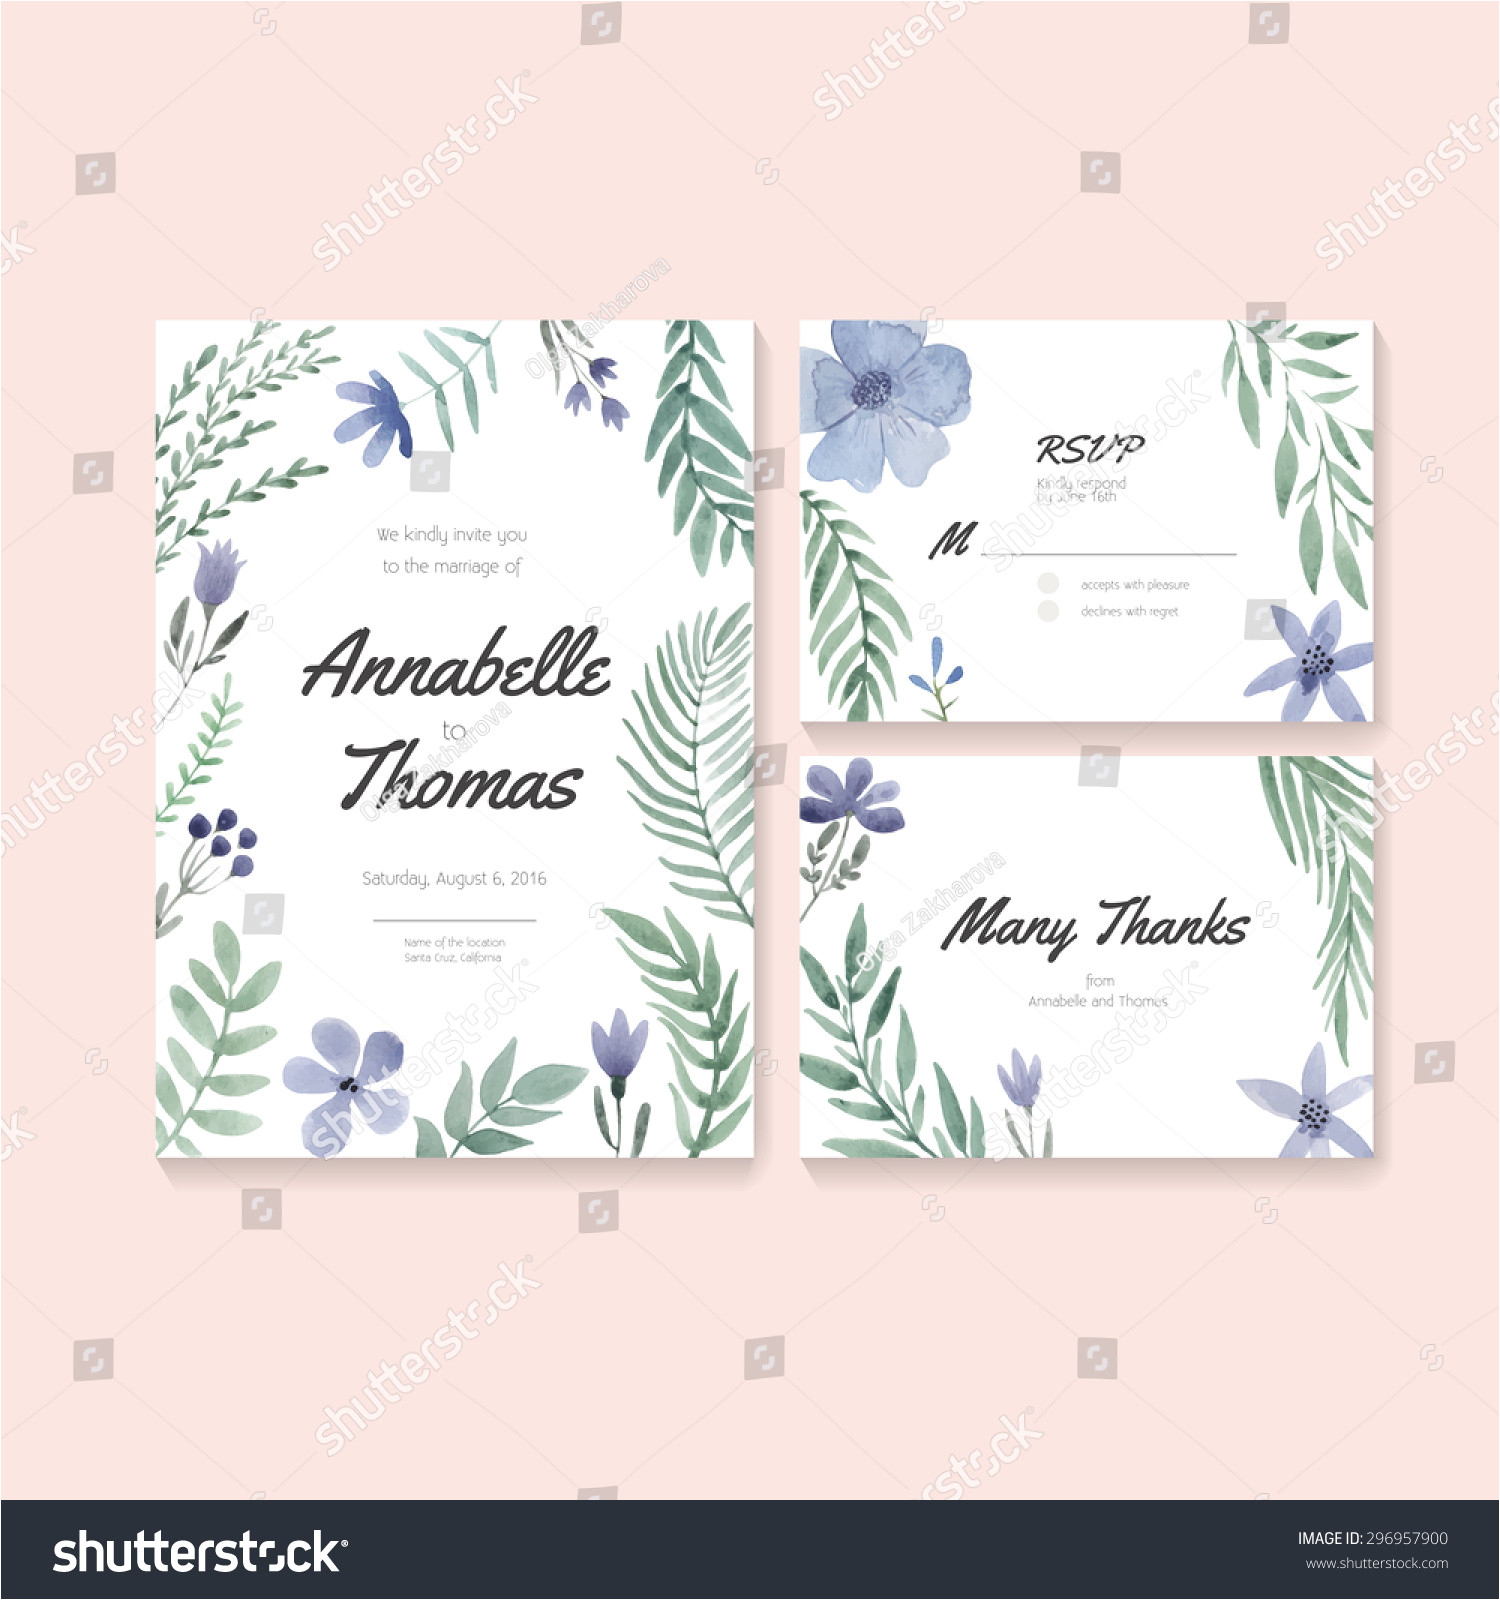 stock vector unique gentle vector wedding cards template with watercolor wedding invitation or save the date